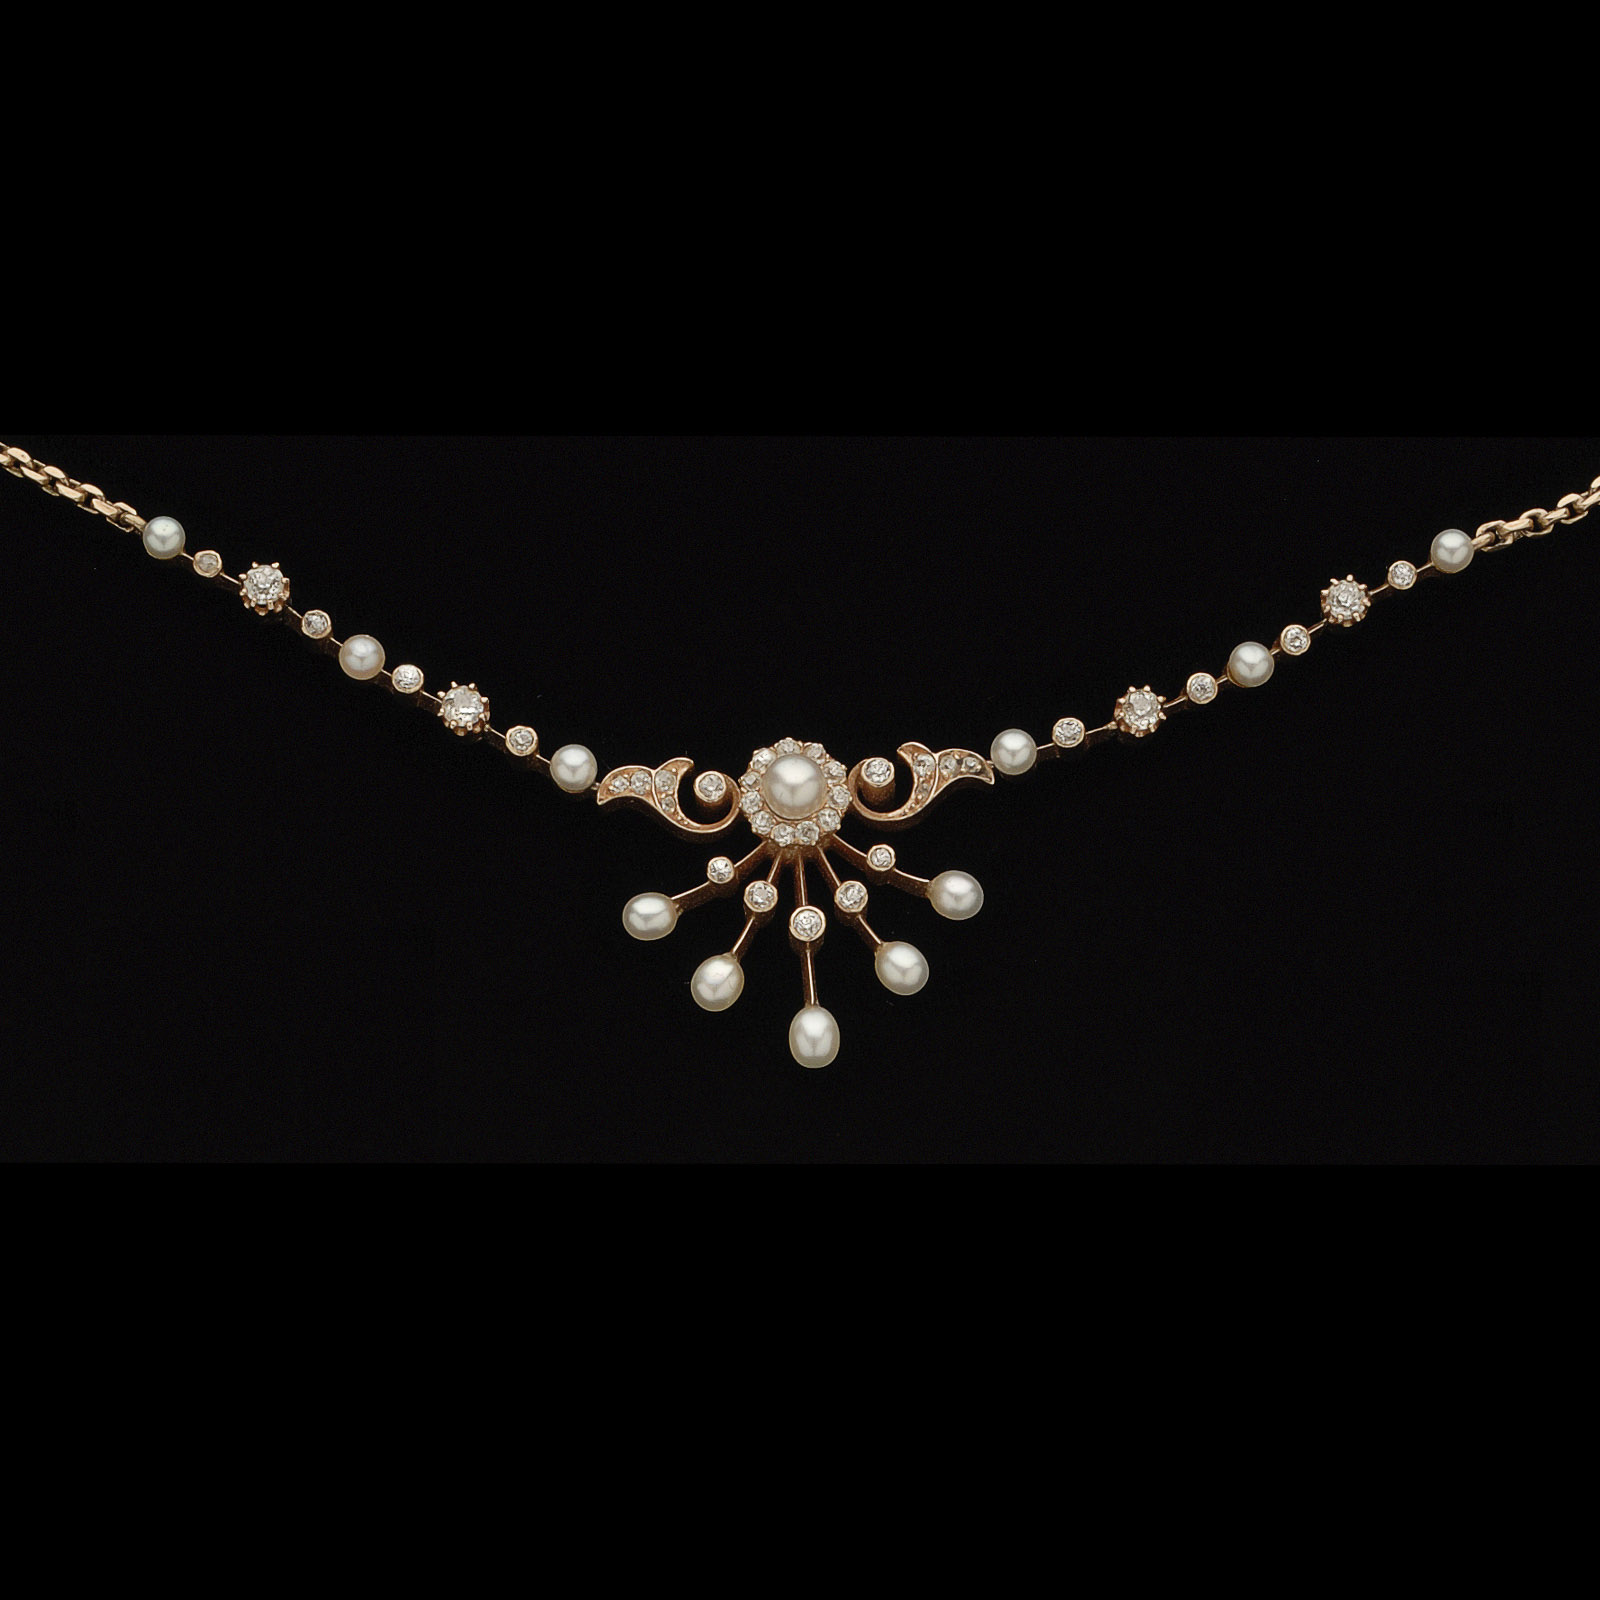 Edwardian Natural Pearl And Diamong Necklace